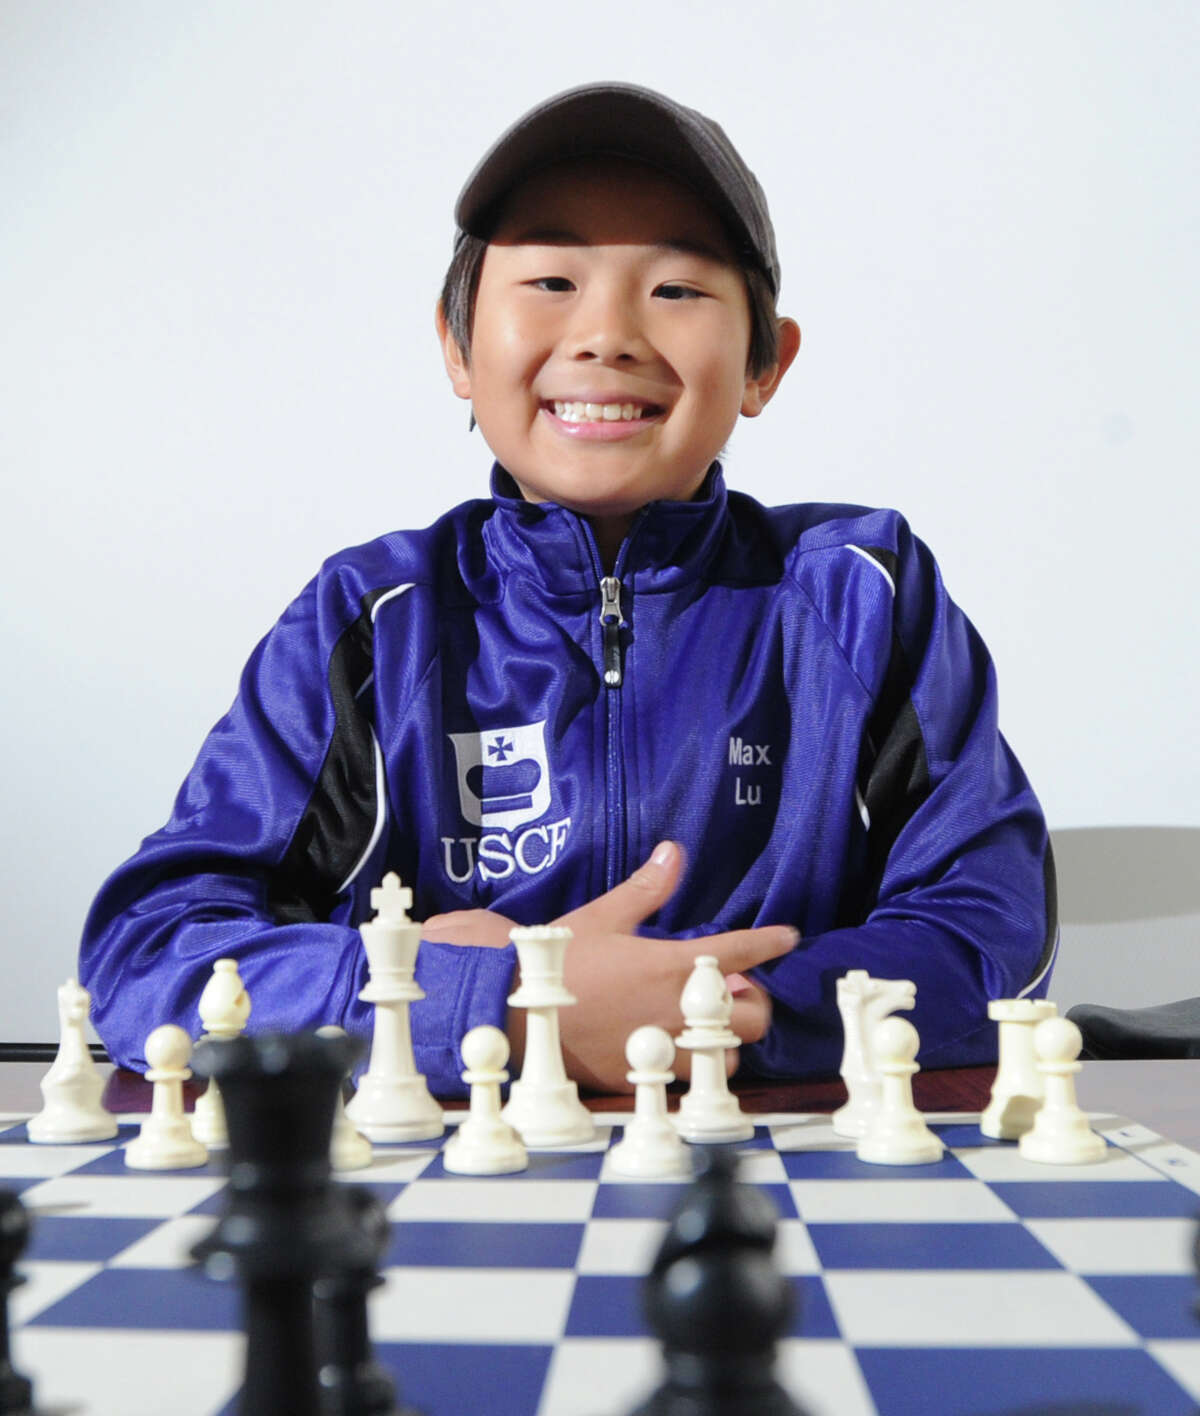 Max Lu, a 10-year old Whitby School student, seen here at the Greenwich Time, Friday, Oct. 2, 2015, has become the youngest chess player to earn the master rating in U.S. Chess Federation history.